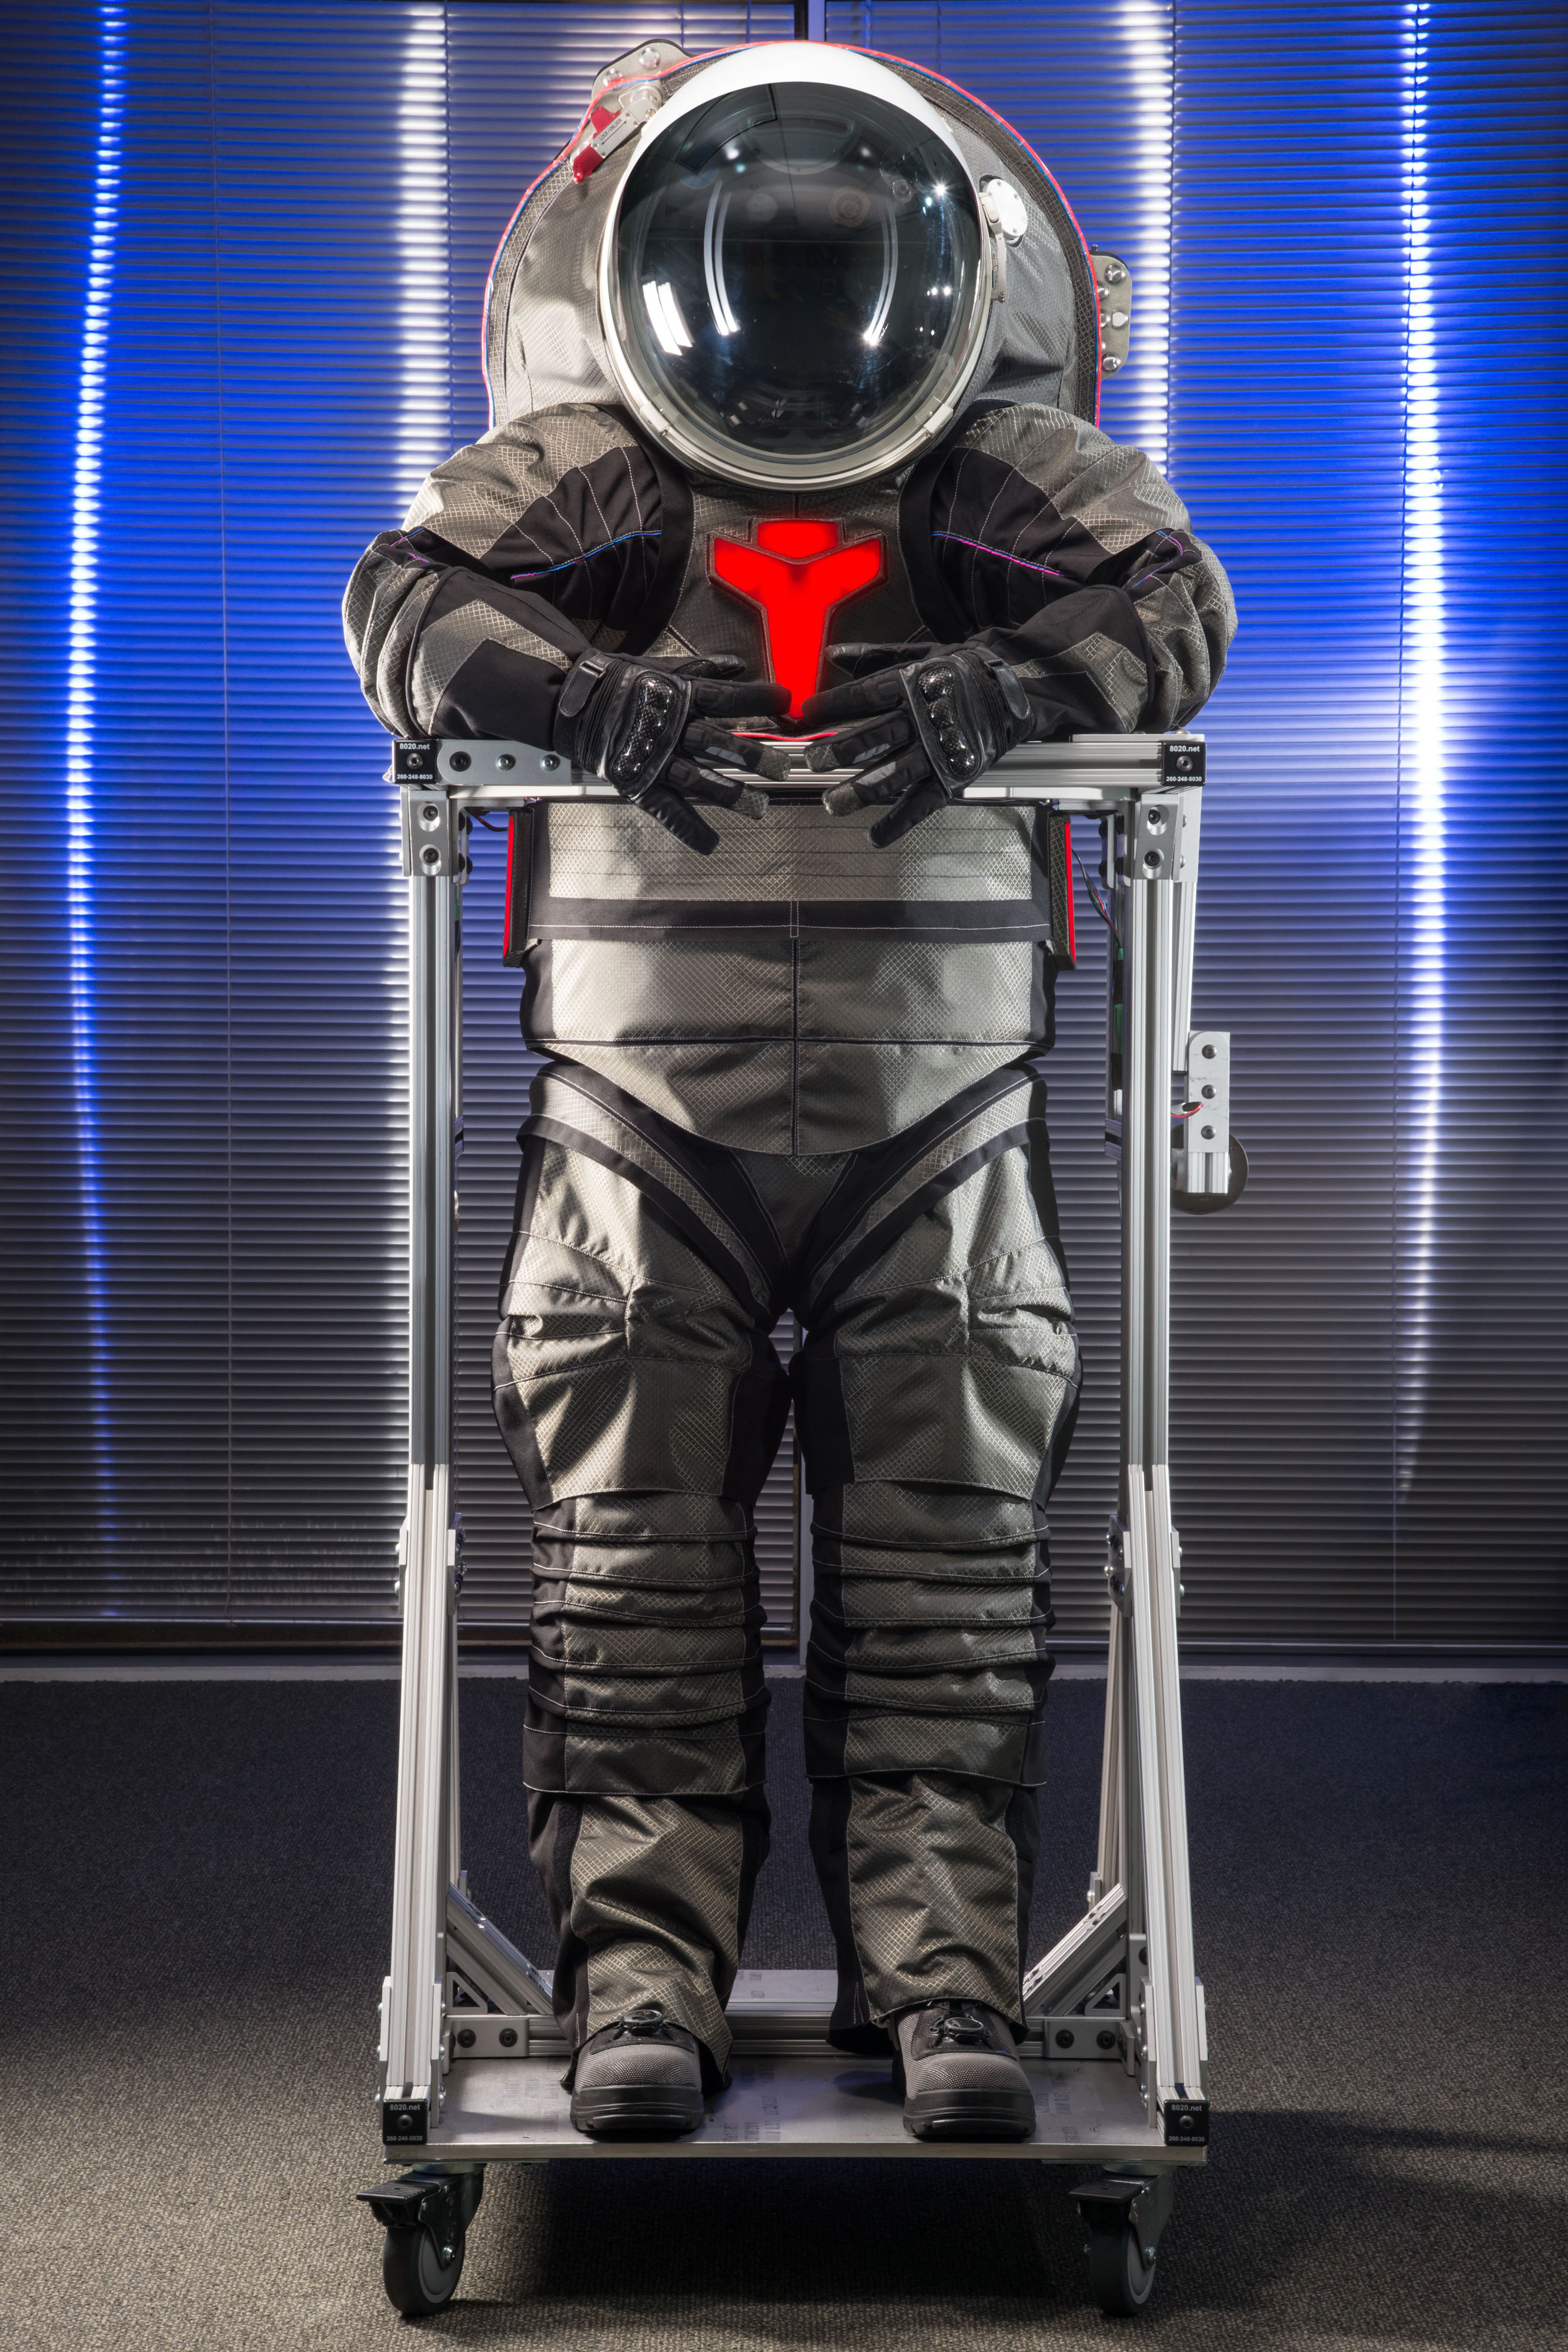 ILC Dover’s Z-2 spacesuit incorporated advanced carbon composite structures and a new elliptical helmet for improved performance over Mark III.  (Photo/NASA)